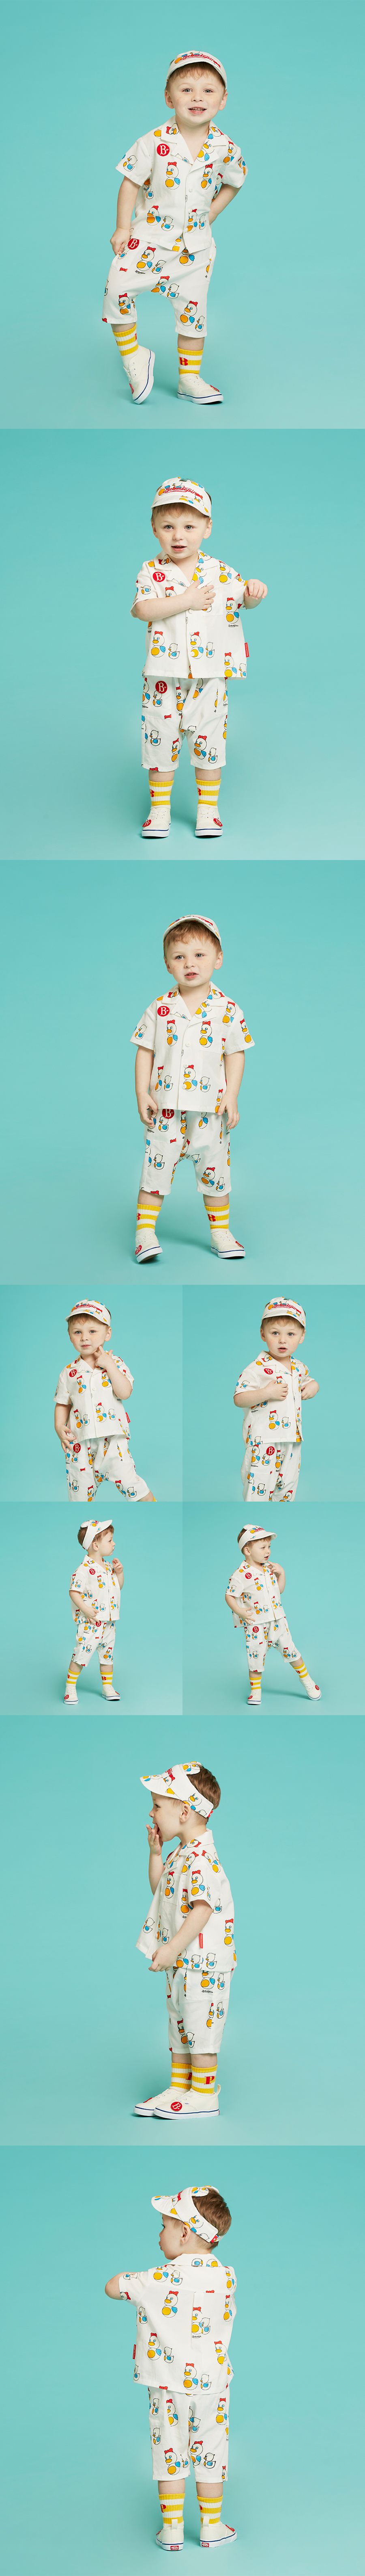 All over famille canard baby shirts 상세 이미지